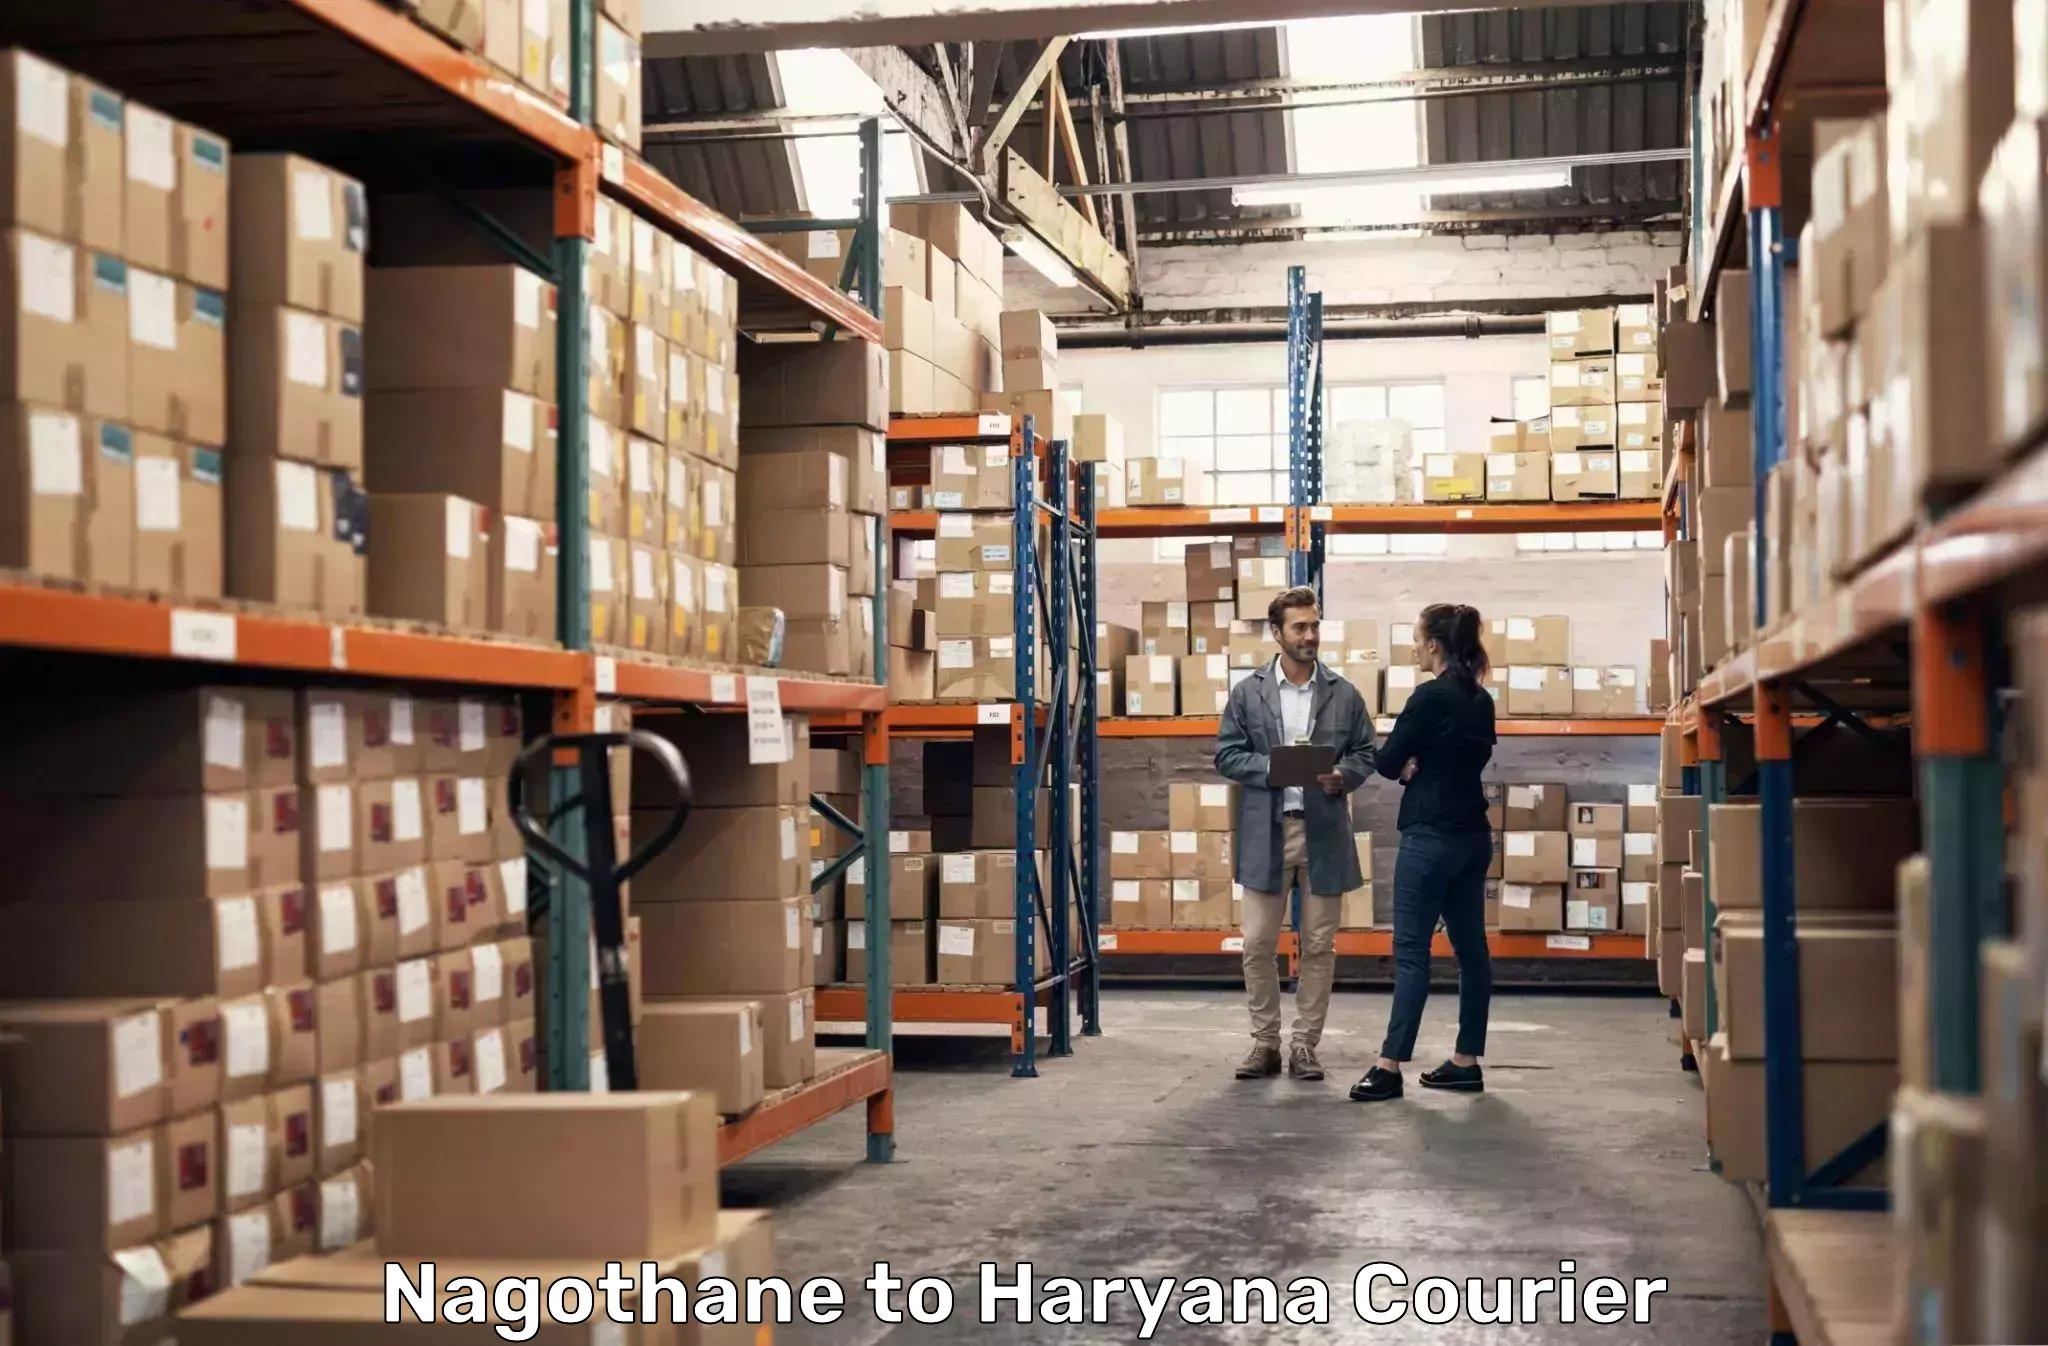 Express package services Nagothane to NCR Haryana